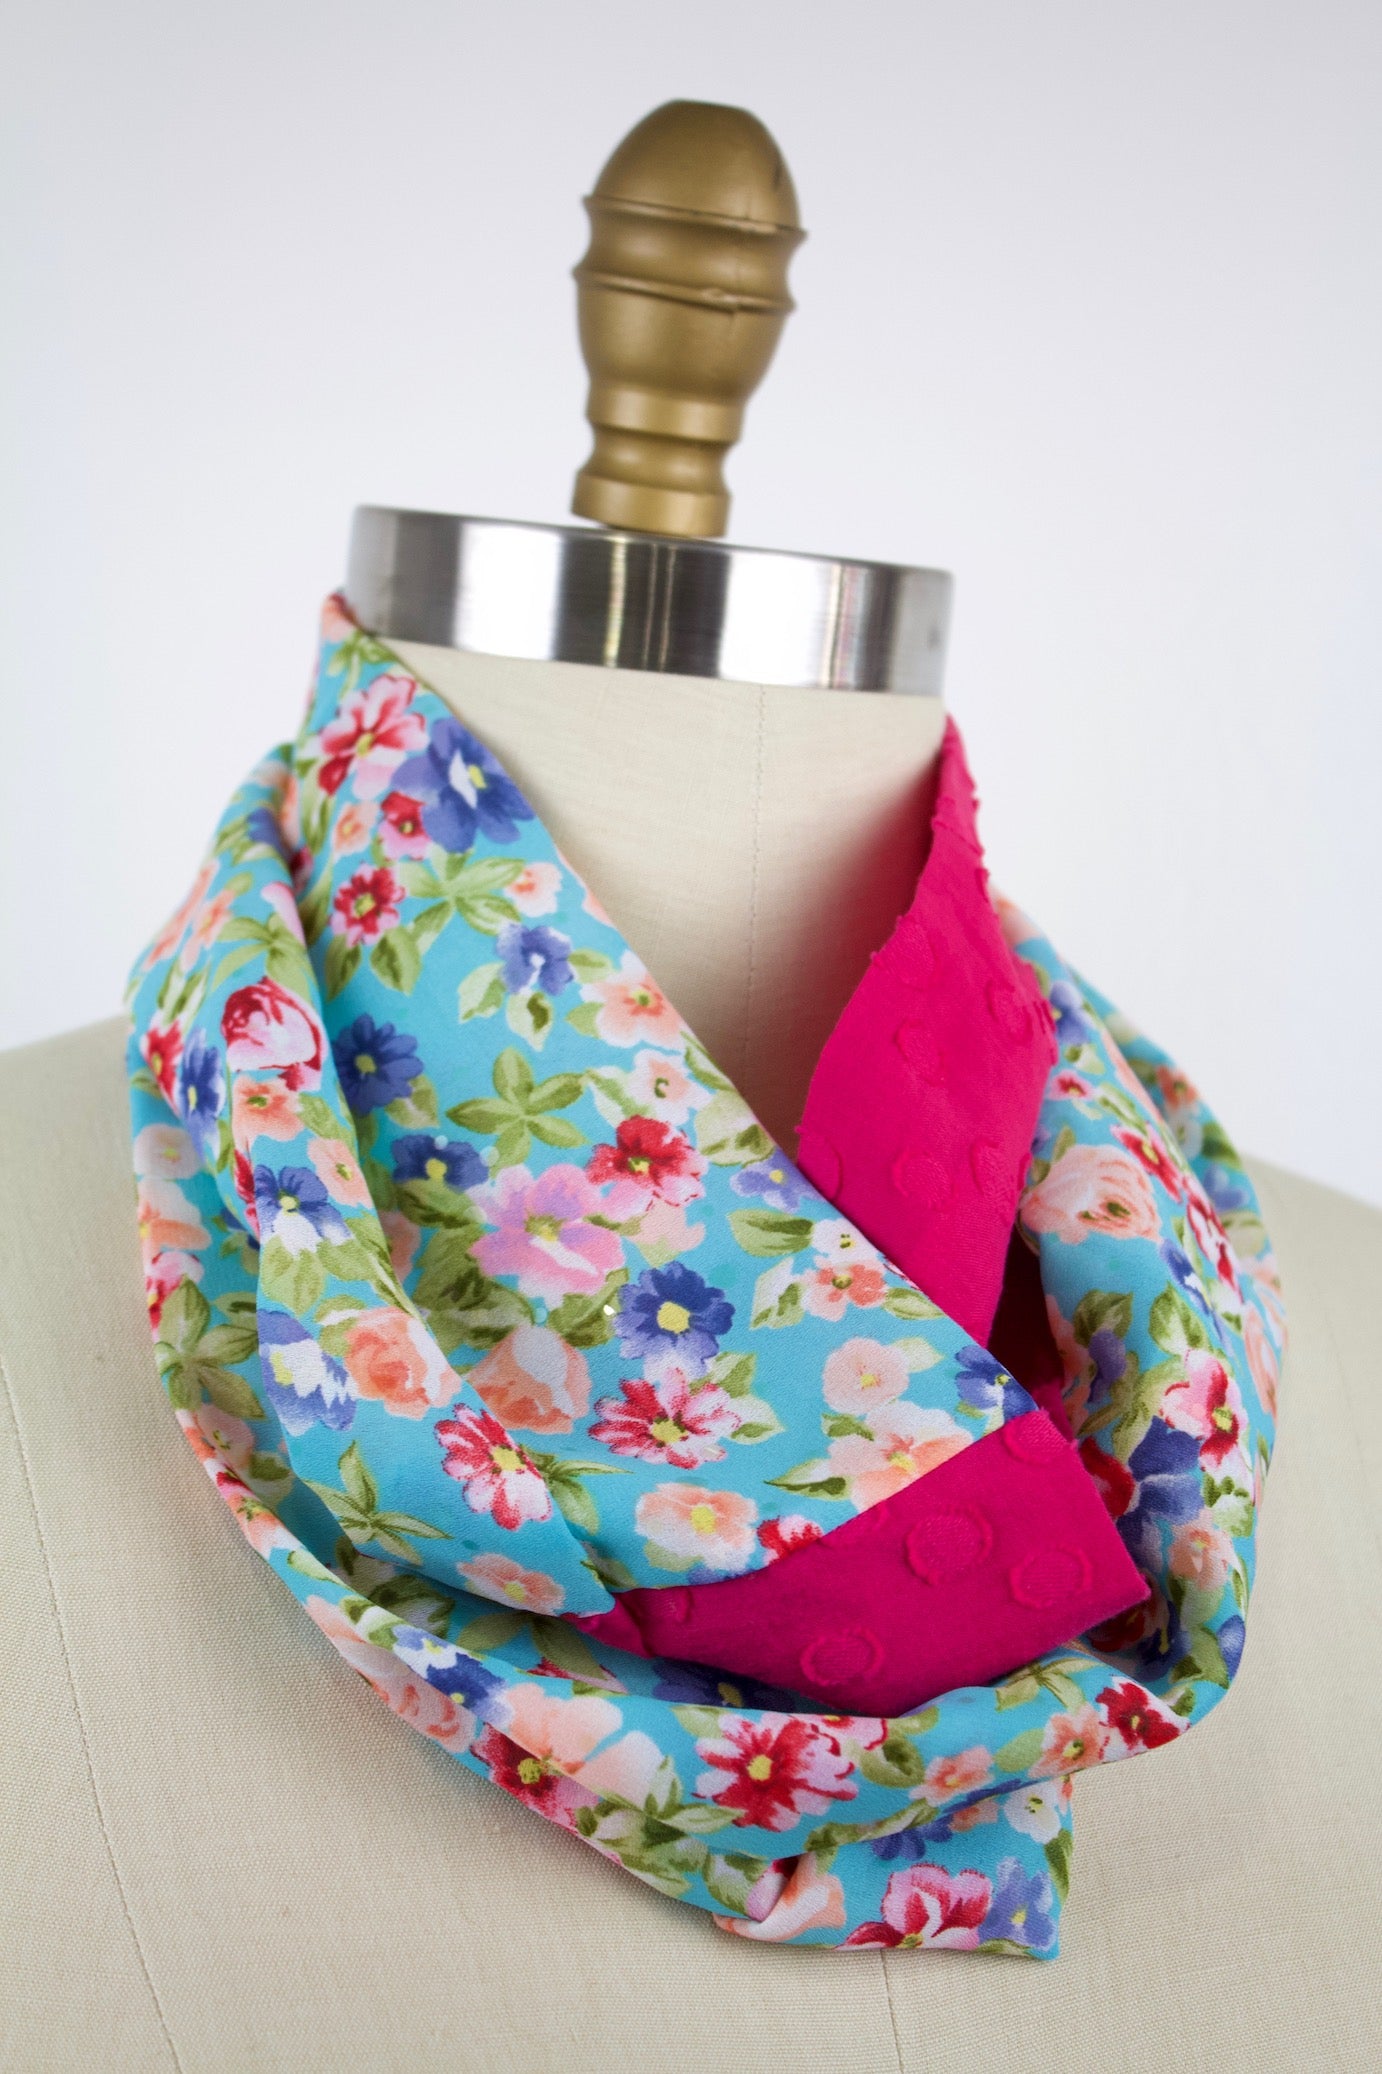 Garden Party Infinity Scarf-The Blue Peony-Category_Infinity Scarf,Color_Blue,Color_Pink,Department_Personal Accessory,Material_Cotton,Material_Polyester,Pattern_Floral,Pattern_Polka Dot